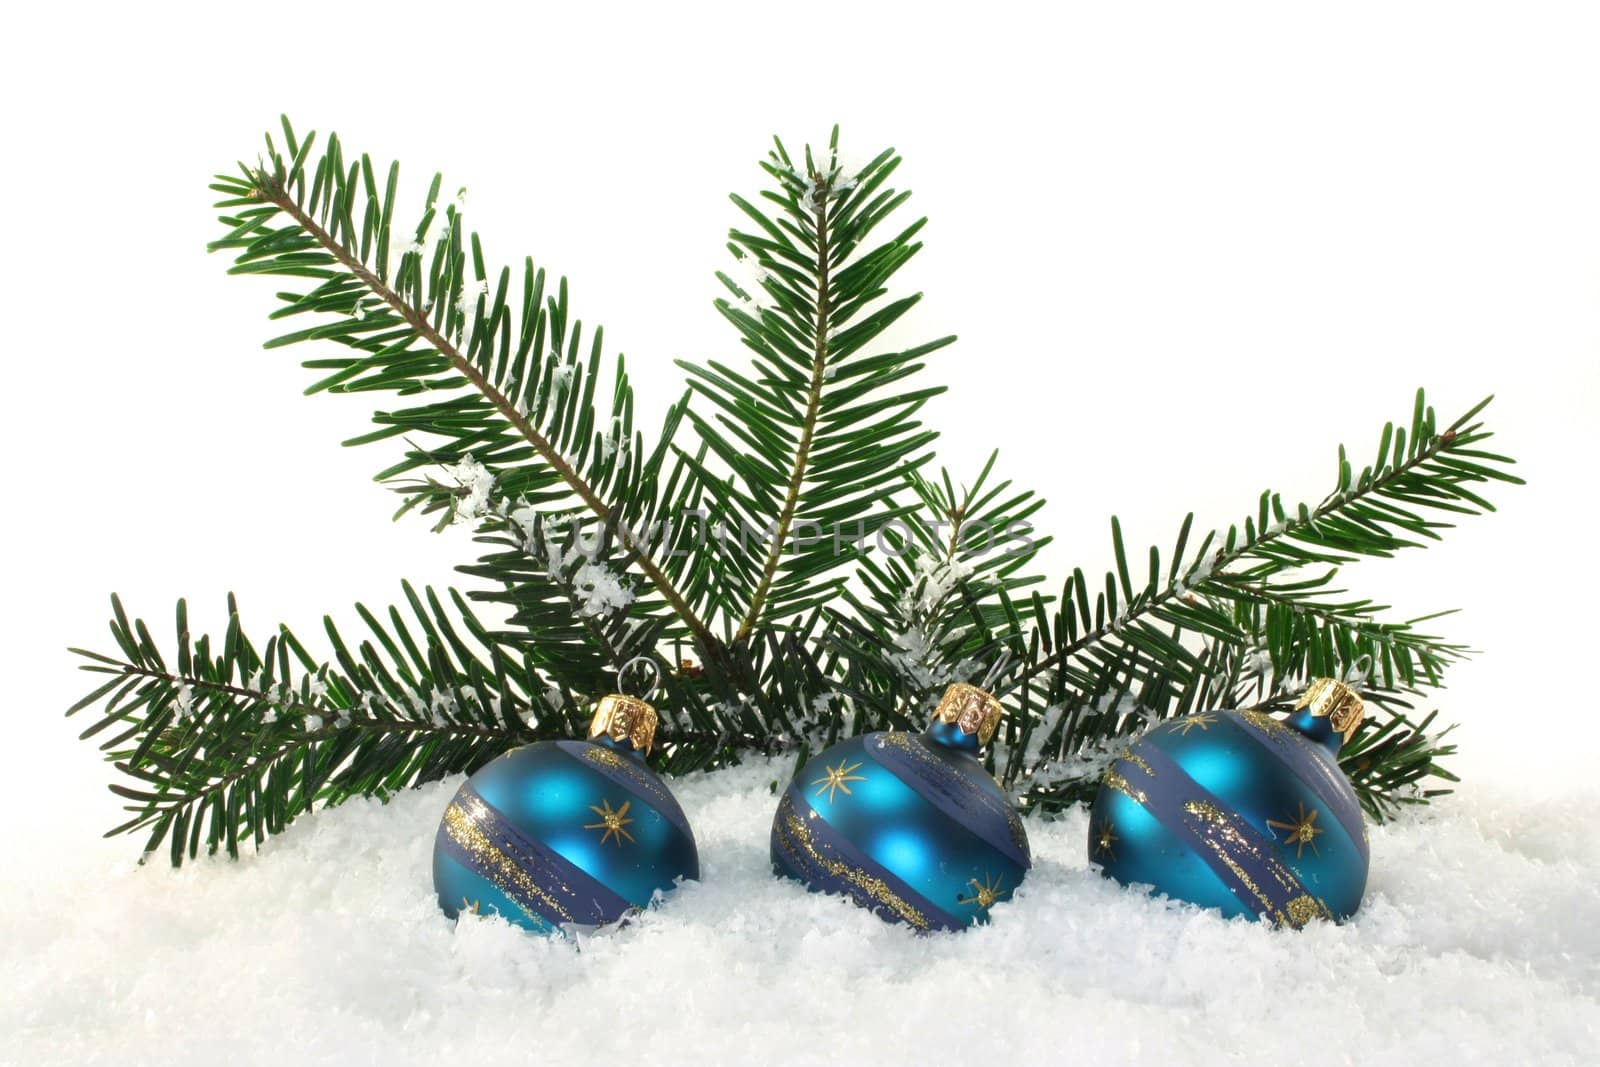 blue Christmas balls and pine branches in the snow